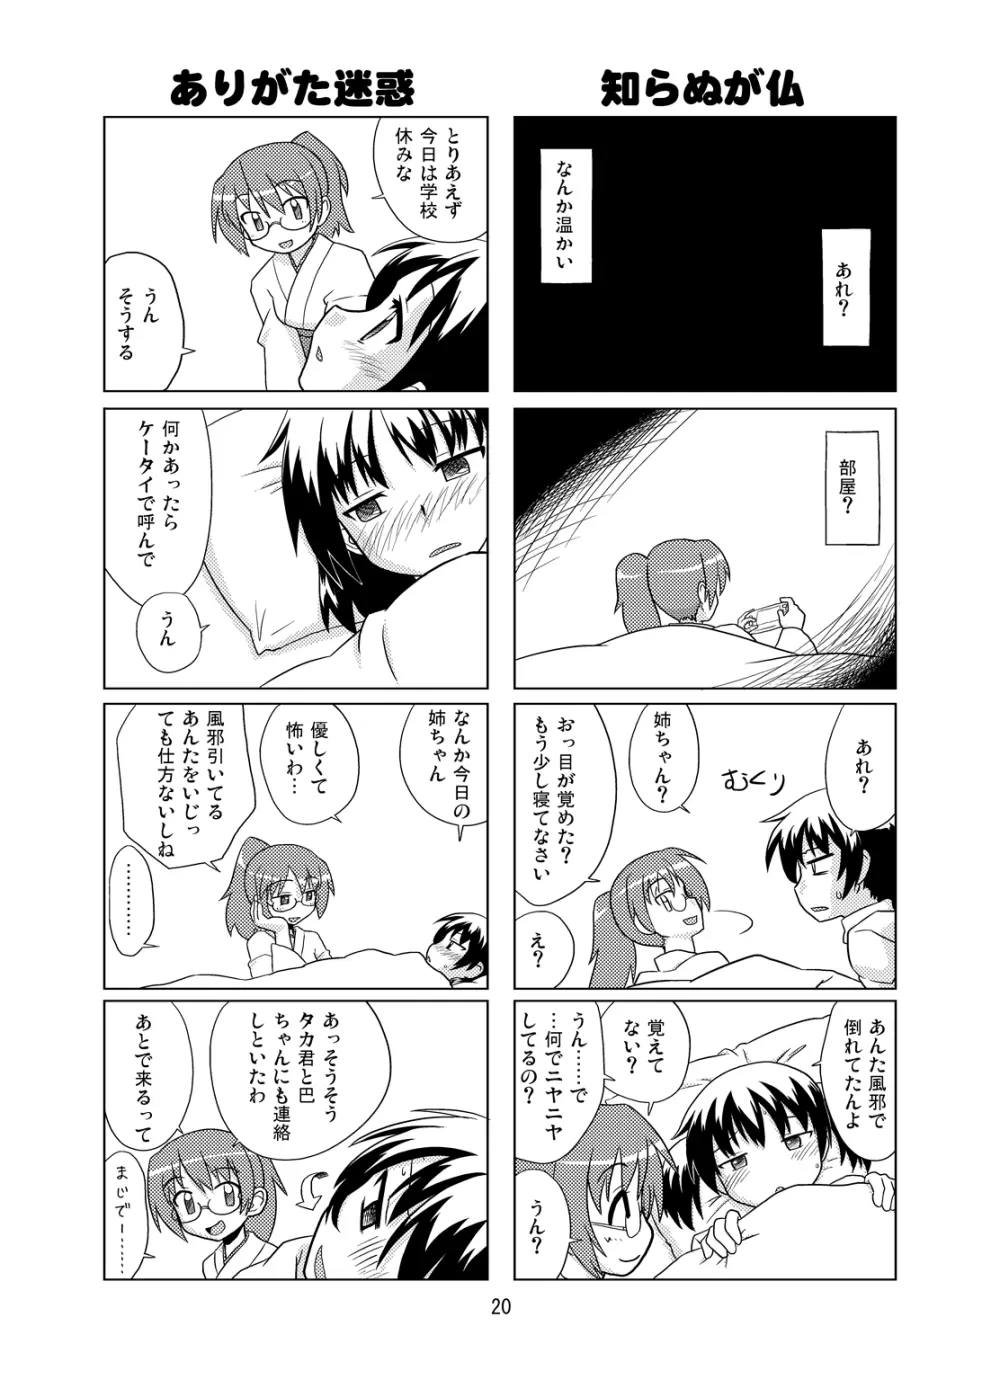 Composition Mix 8 はじマル！6 Page.19